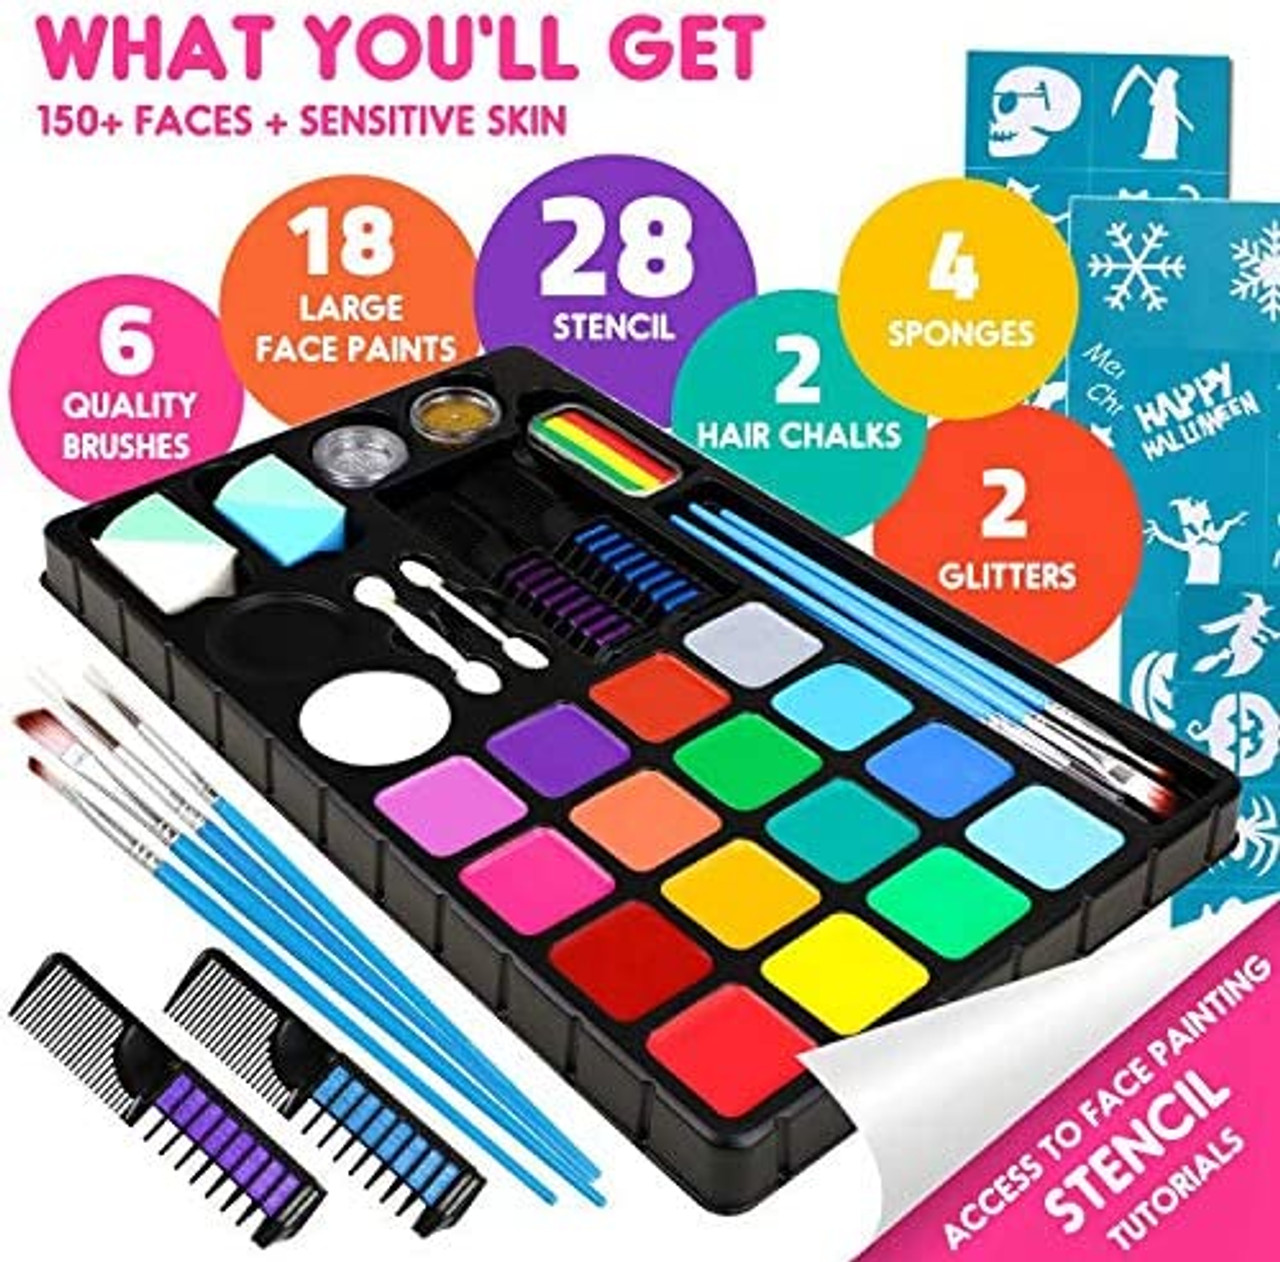 Face Painting Kit for Kids, 15 Colors Non-Toxic Water Based Face Paint  Kits, Brushes Sponges Glitters Gem Sheet Stencils Hair Chalk Halloween  Makeup